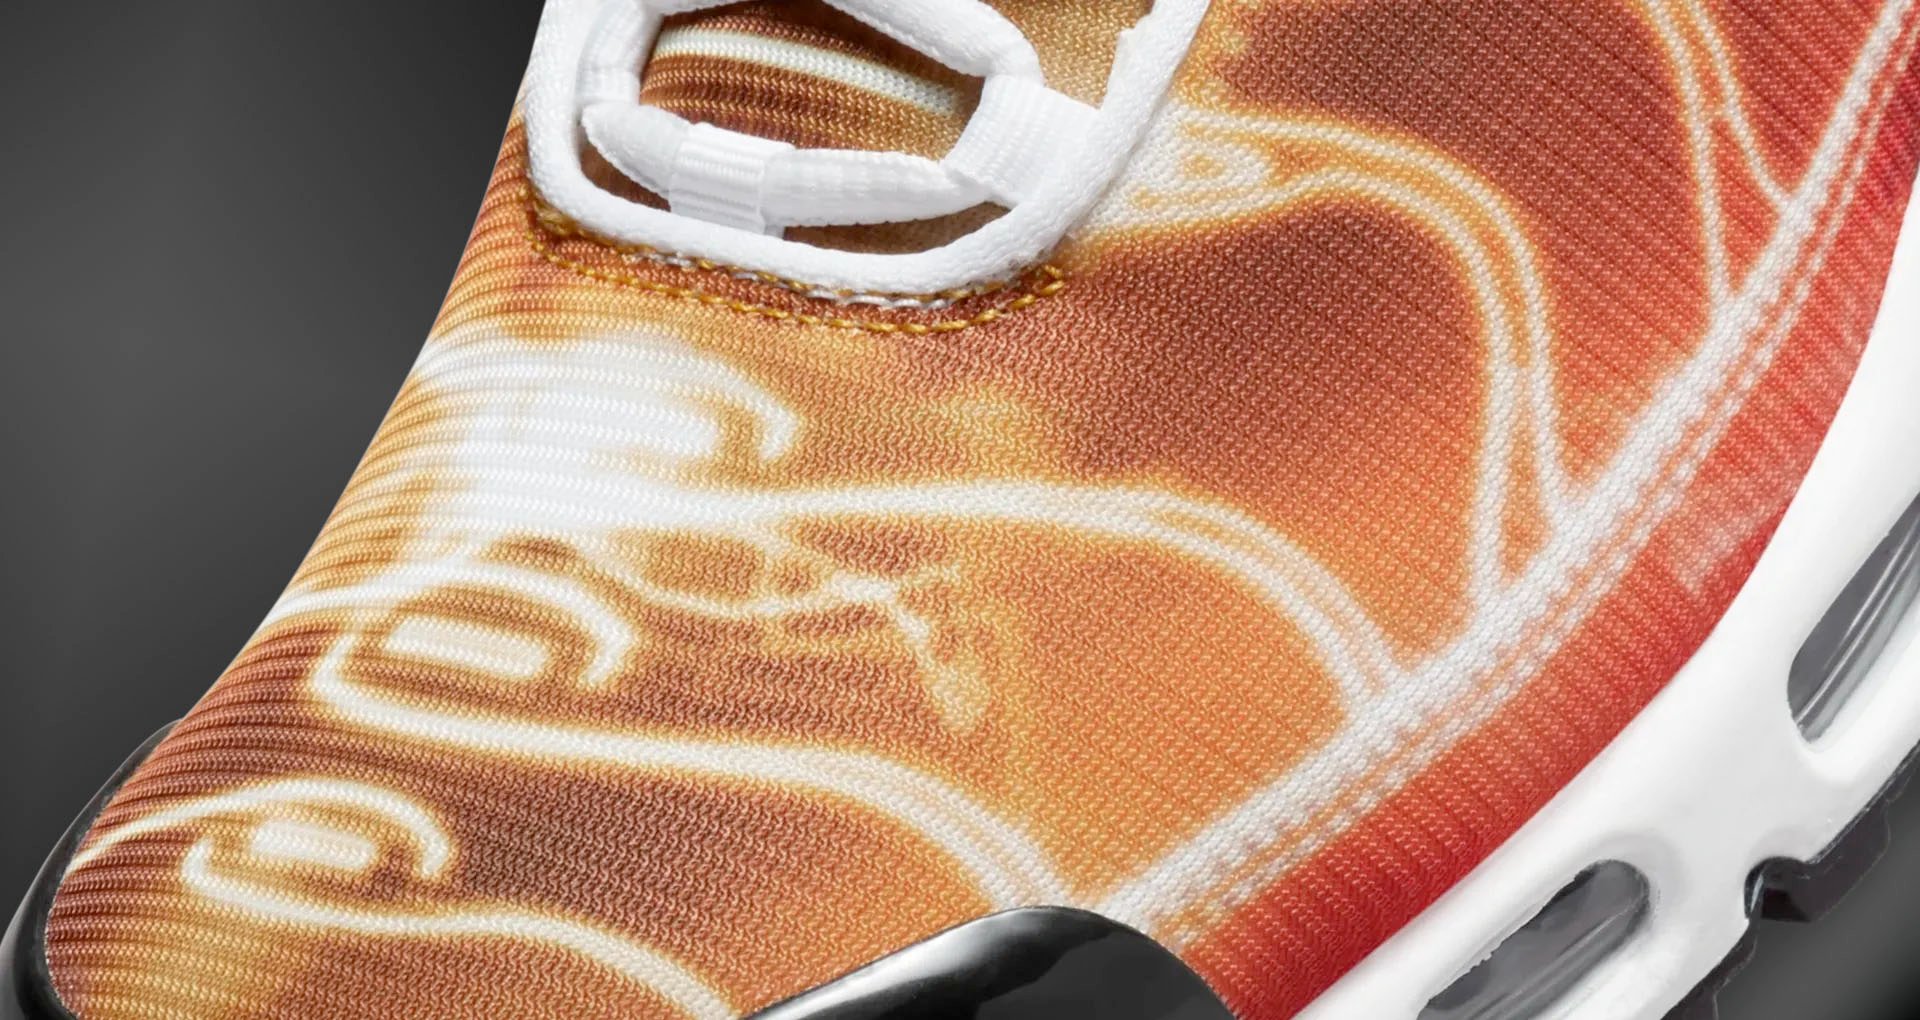 An image shows the Nike Air Max Plus Light Photography sneakers up close.